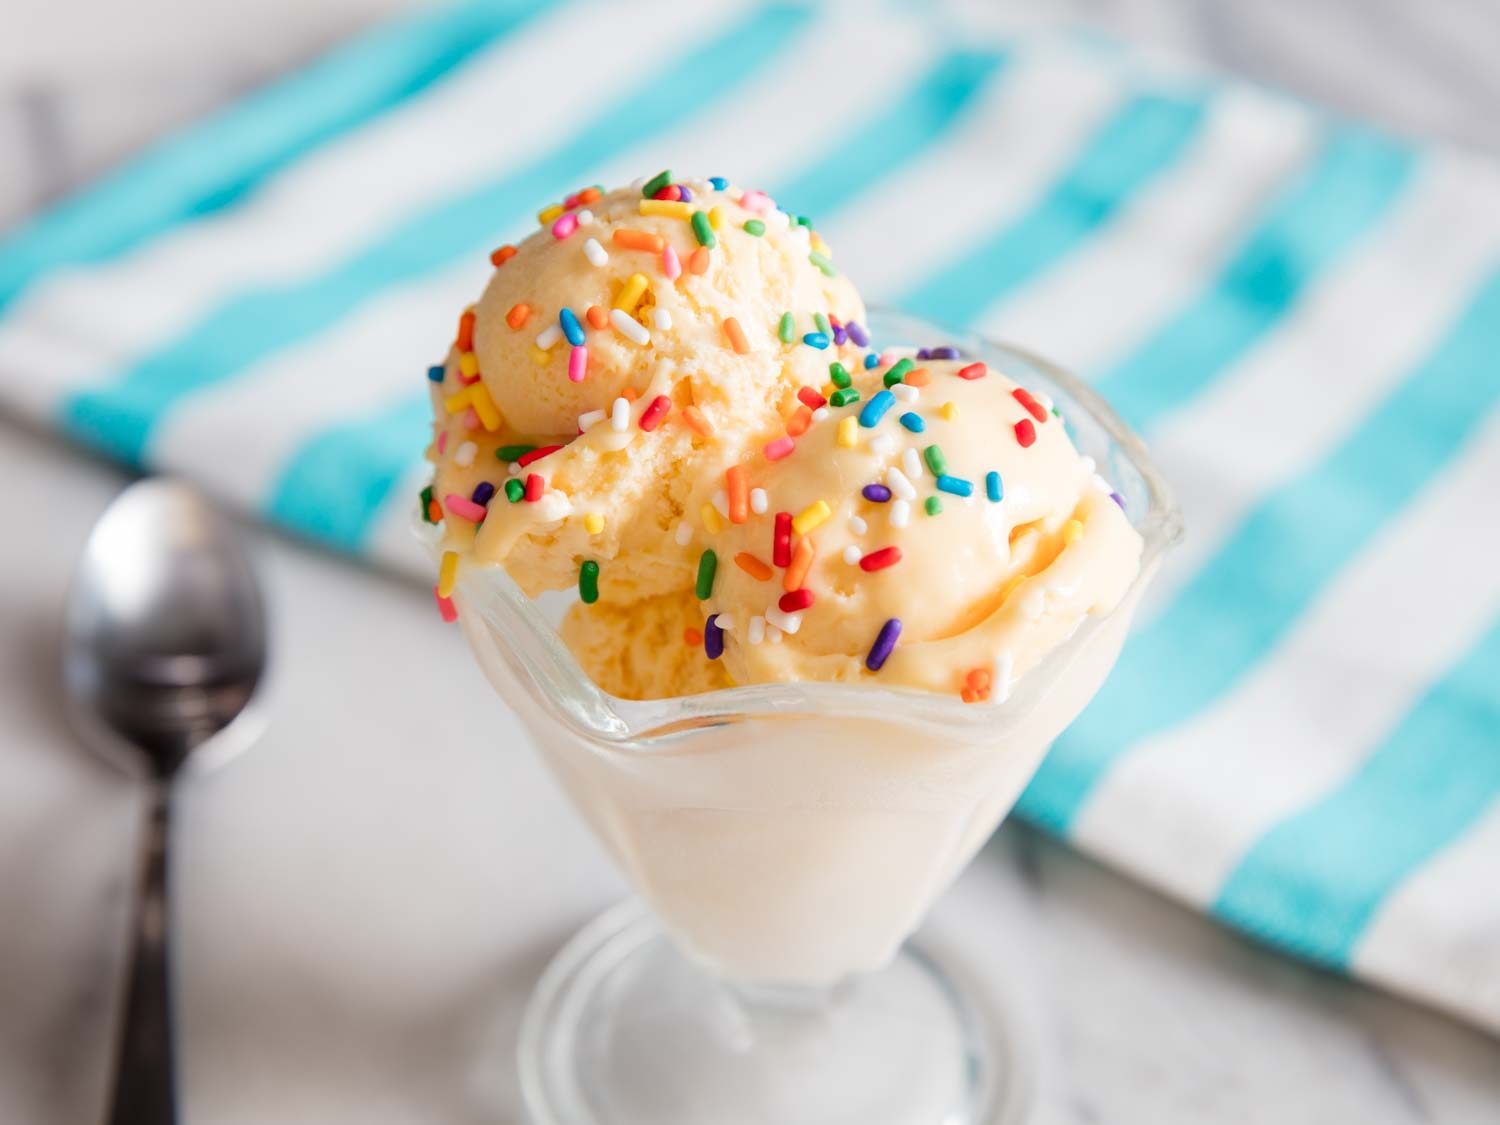 A stemmed dish of vanilla no-churn ice cream, topped with rainbow sprinkles